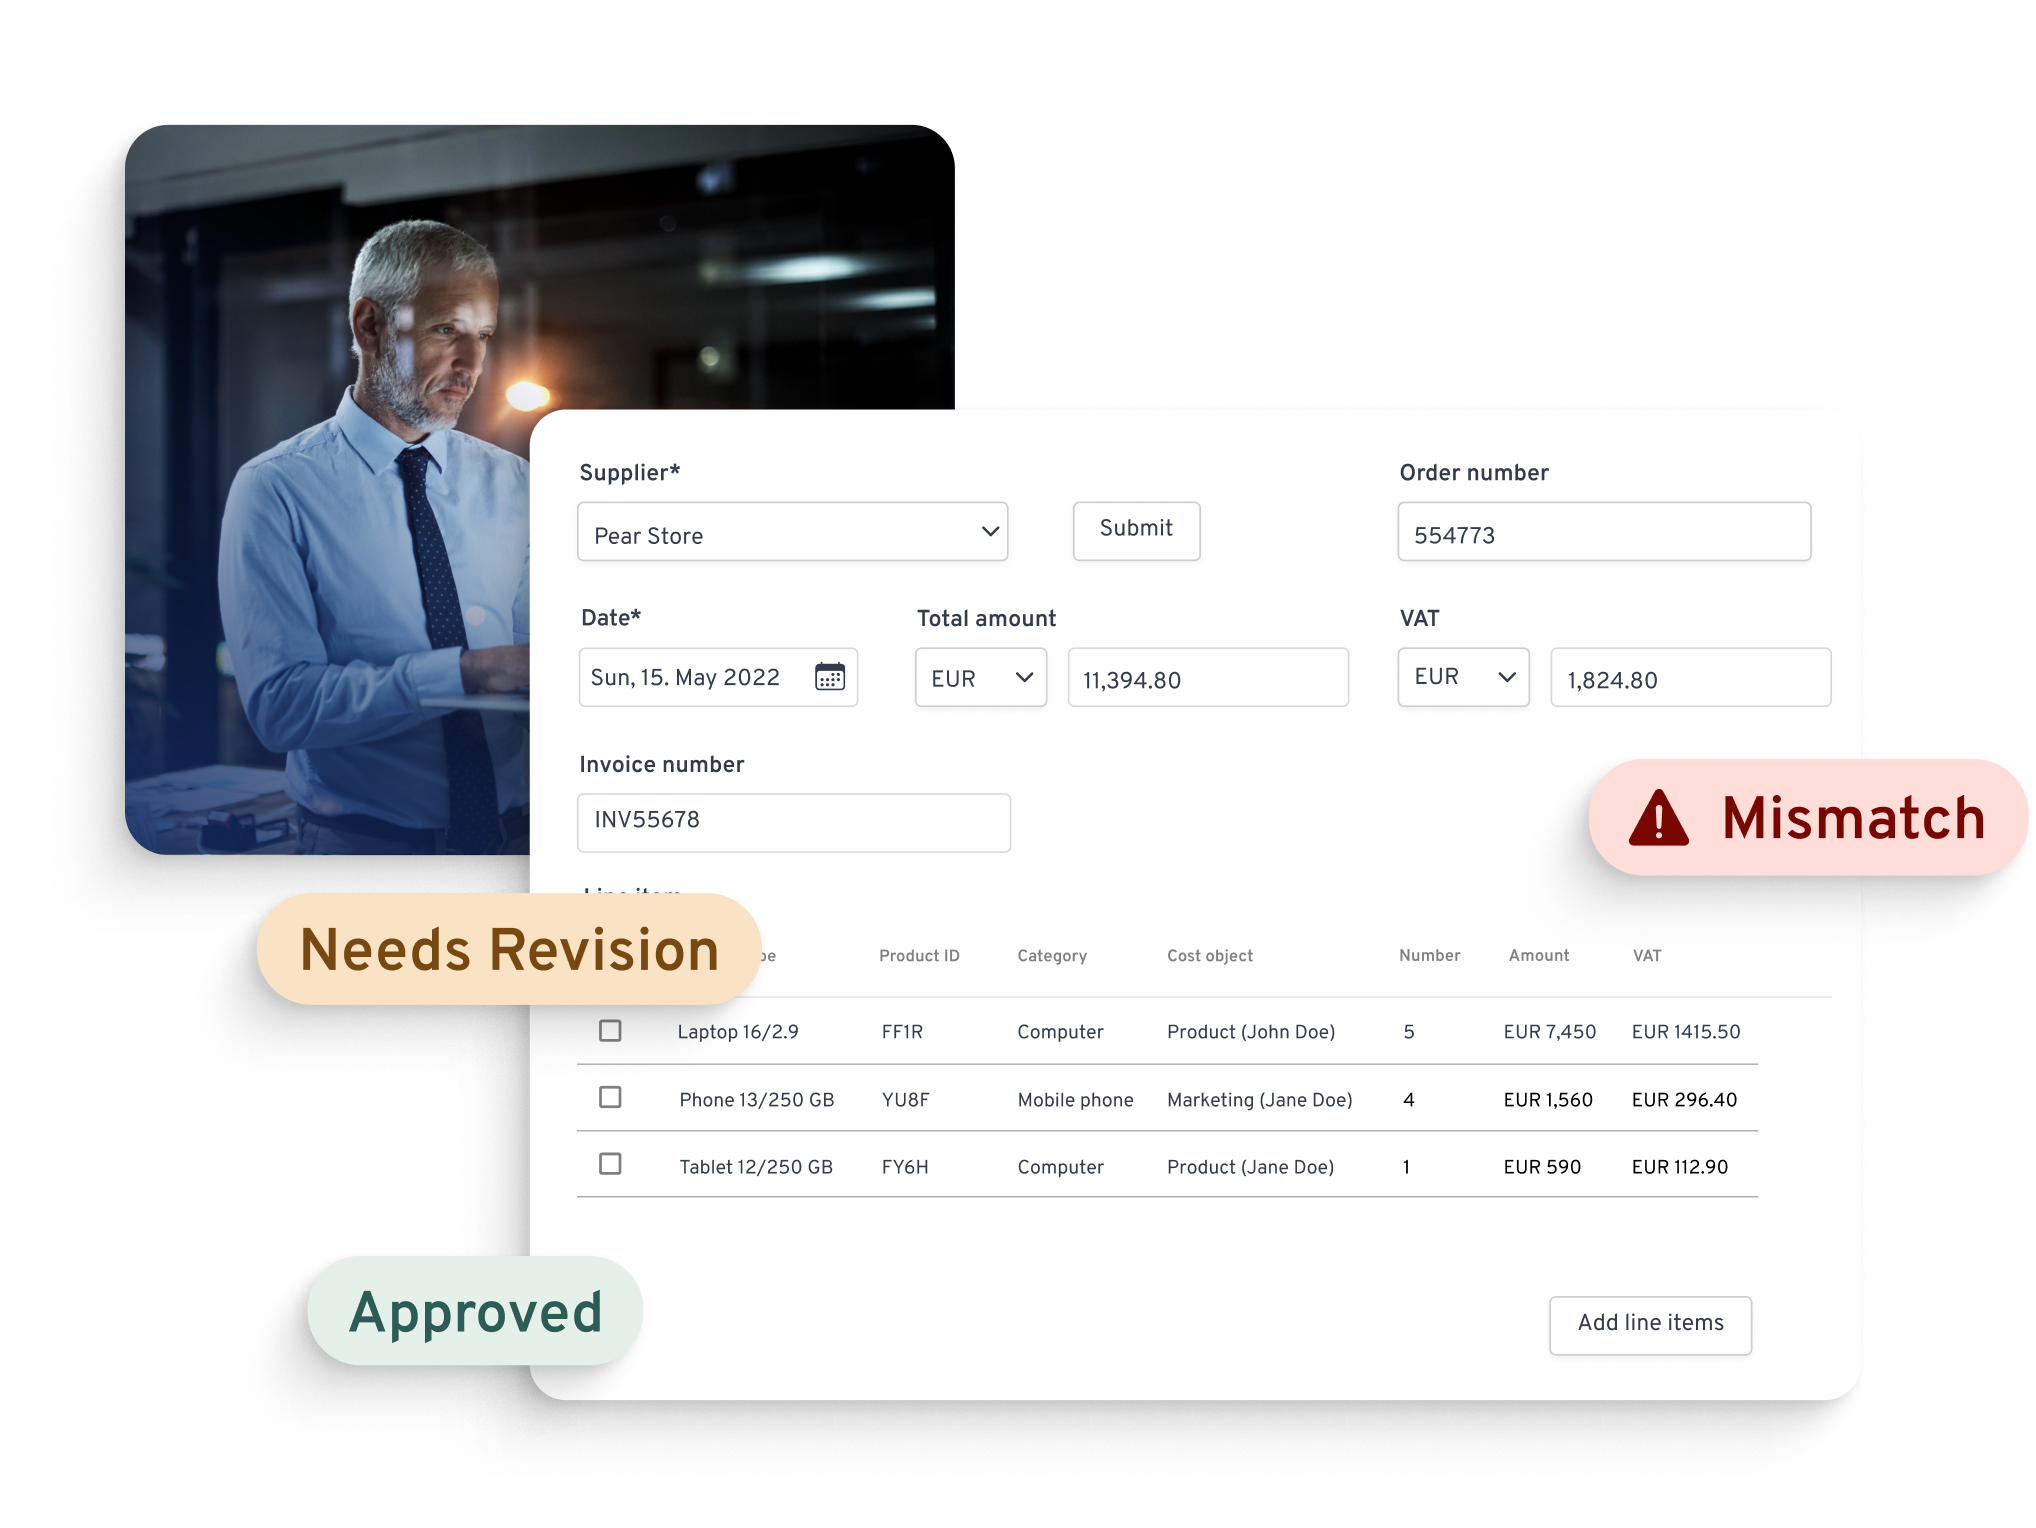 Process invoices automatically.​ Consolidate your accounts payable process, manage invoices at scale, automate approvals with custom workflows, and pay on time with Yokoy’s AI-powered invoice management solution.